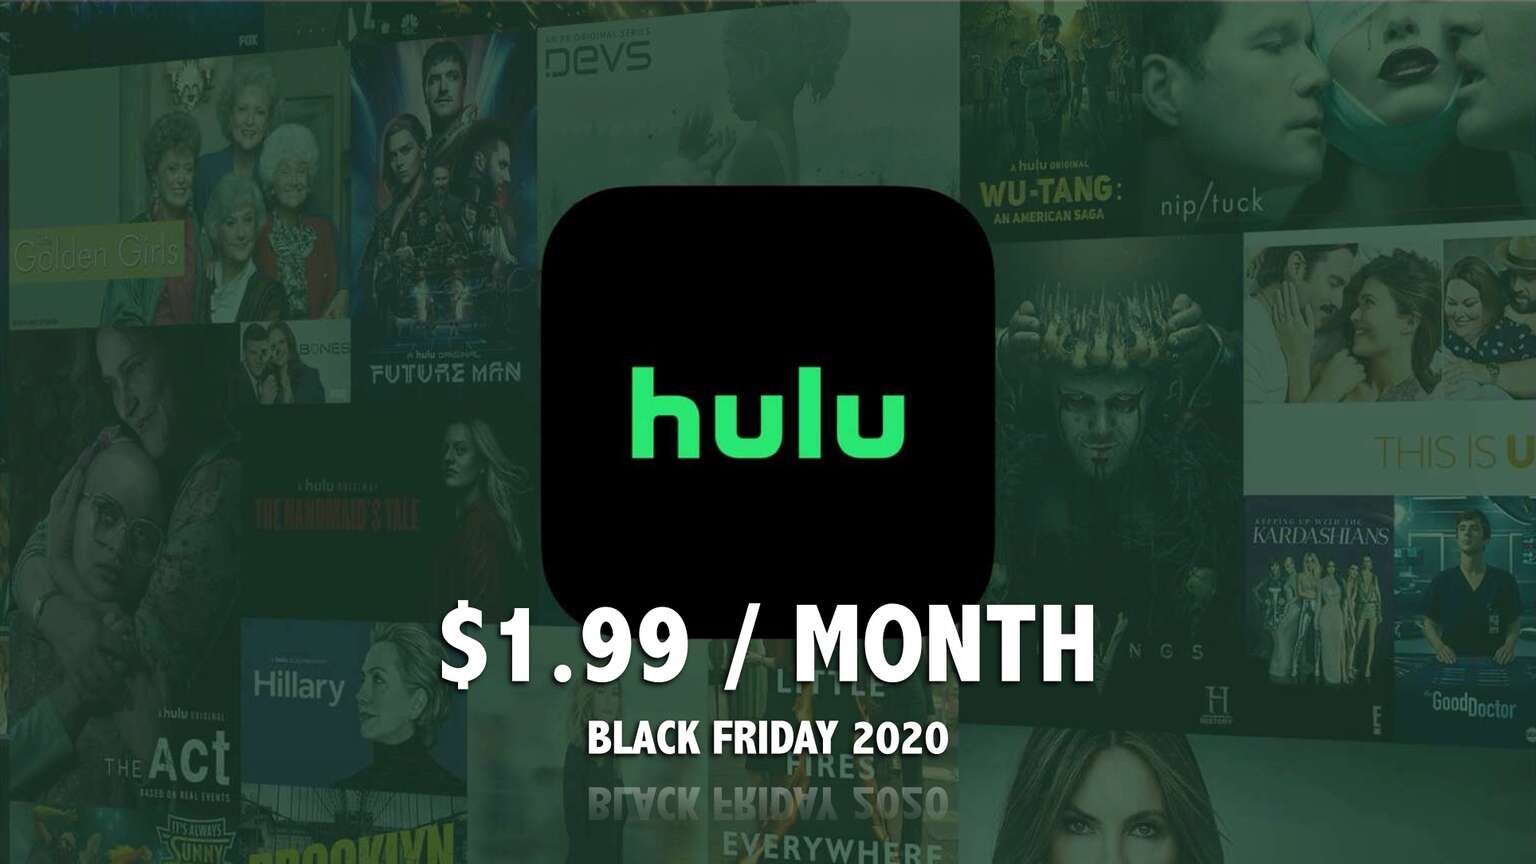 Hulu Black Friday 2020 Get Hulu For Just 1.99 (66 OFF) The Streamable